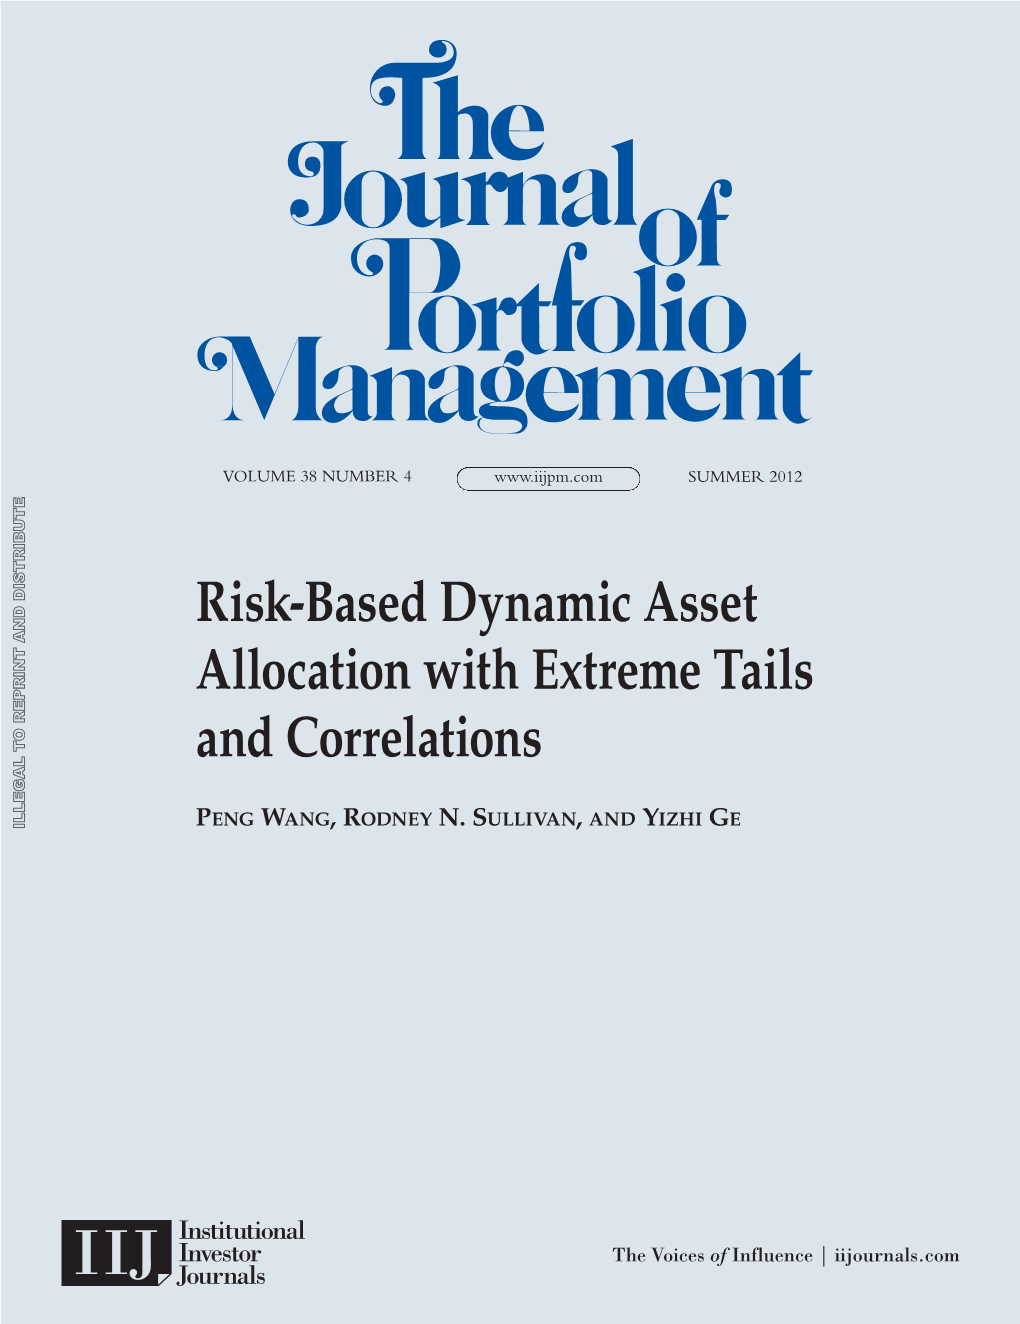 Risk-Based Dynamic Asset Allocation with Extreme Tails and Correlations